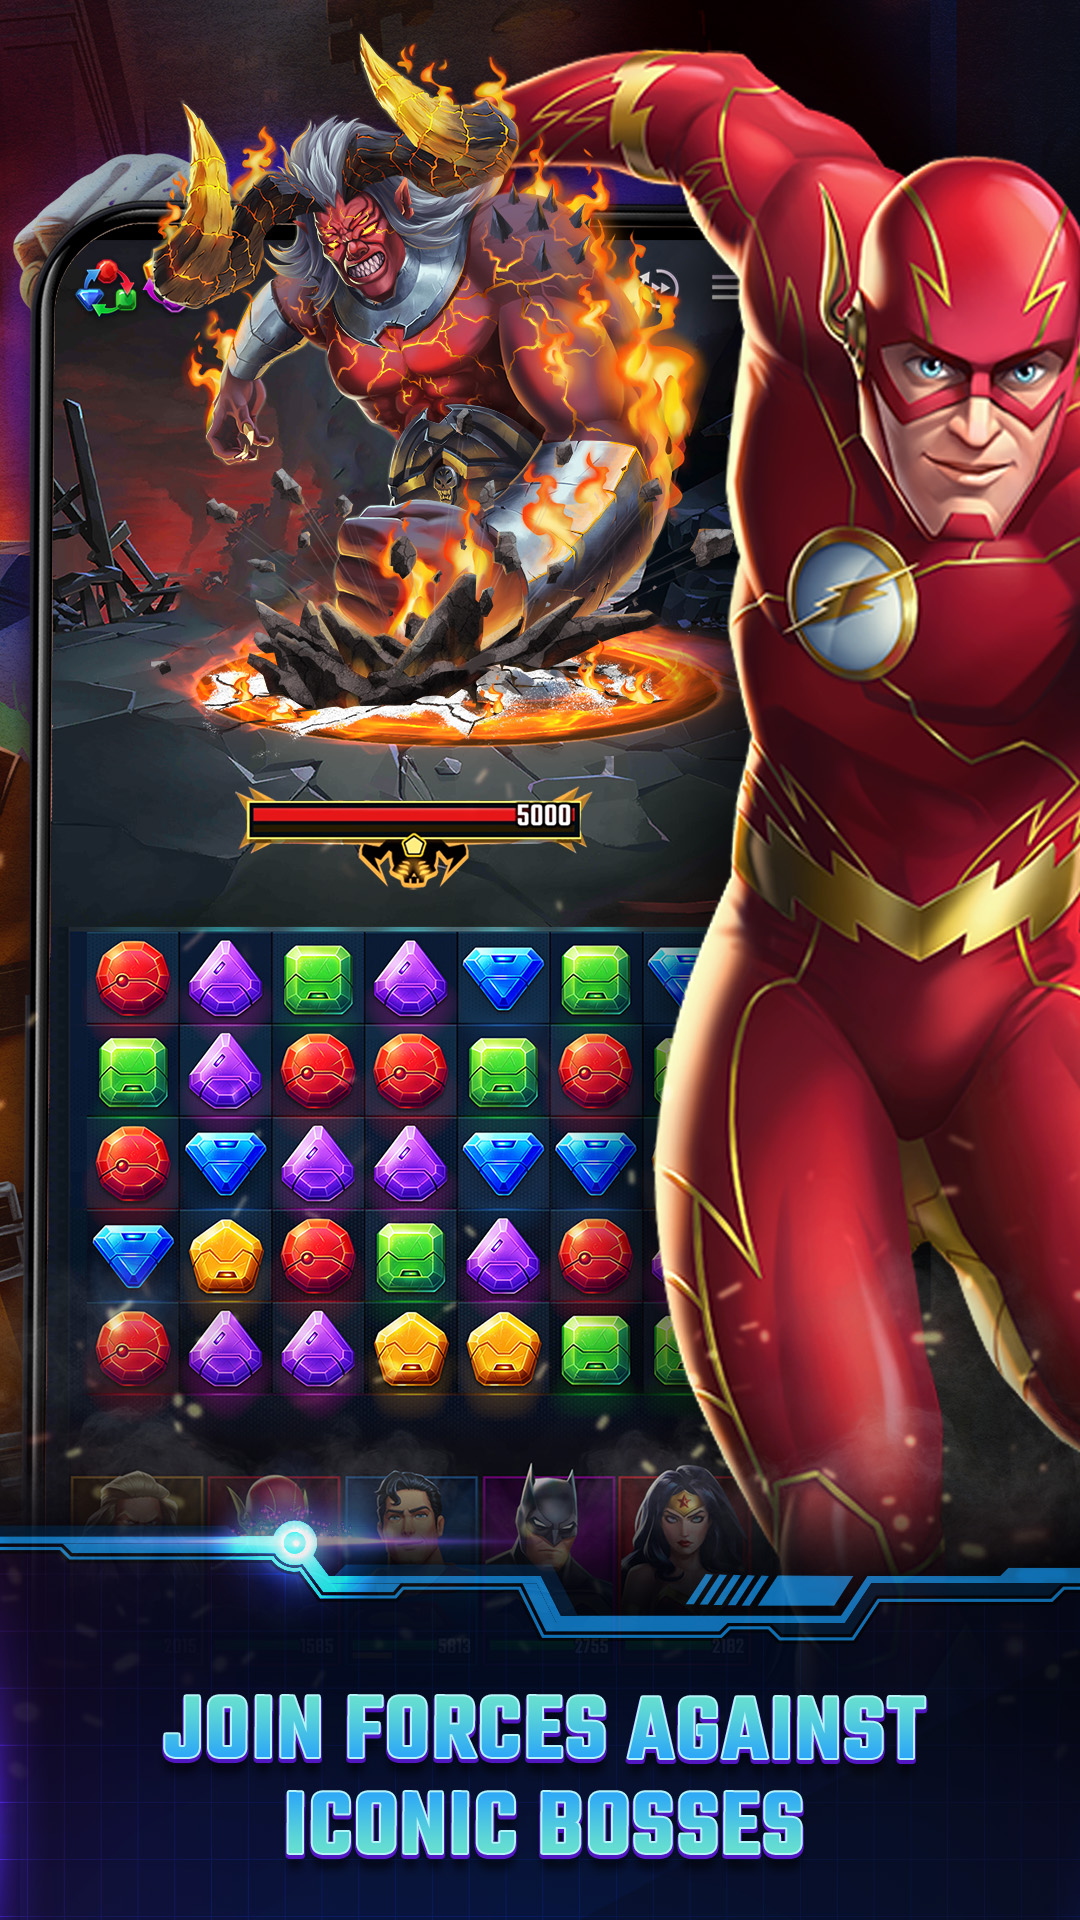 DC Heroes & Villains: Match 3 - Android game screenshots.